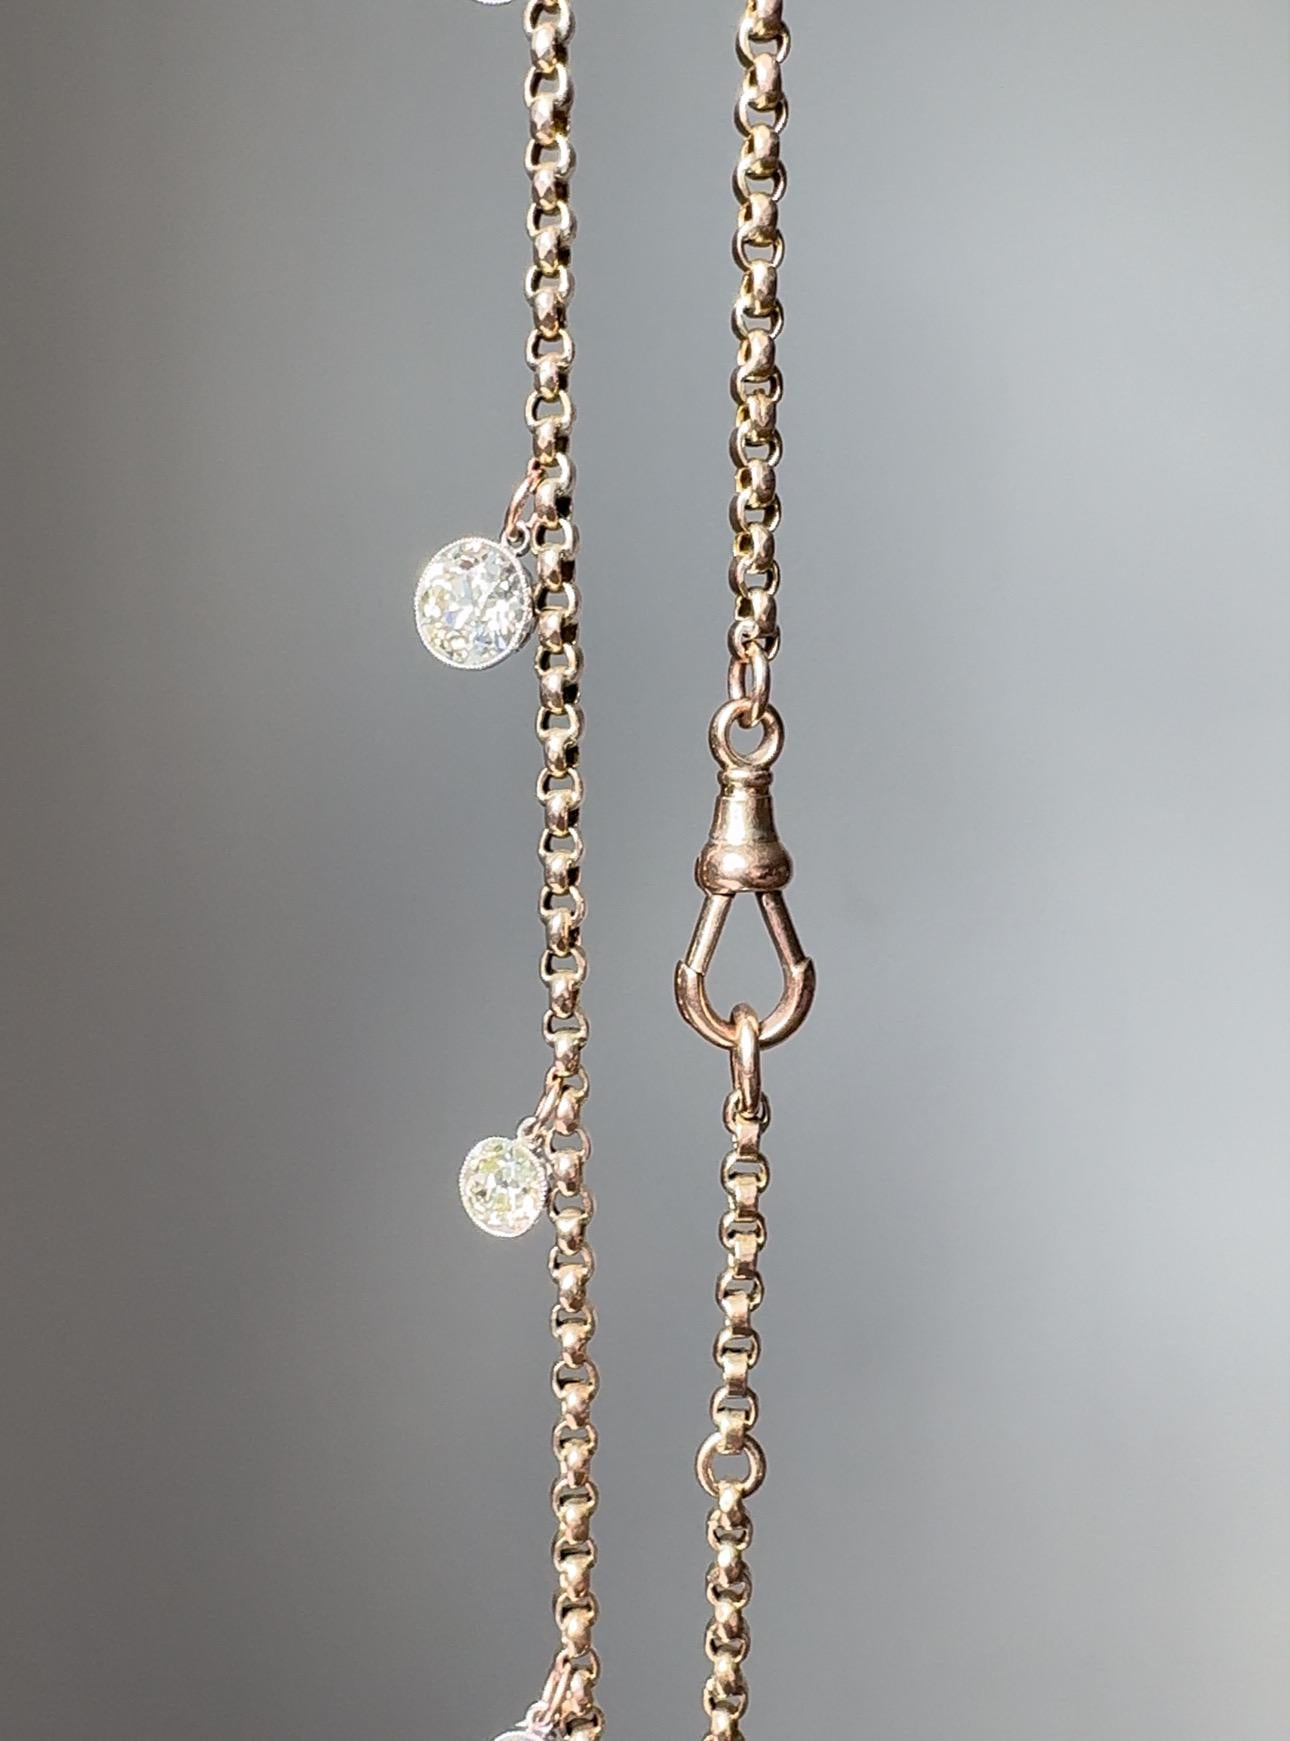 Wonderfully wearable, this bespoke necklace is composed of a graduated line of sparkling European cut diamonds, weighing a total of 4.37 carats, bezel set in platinum and suspended on a Victorian 9 karat rose gold belcher link chain. The necklace is